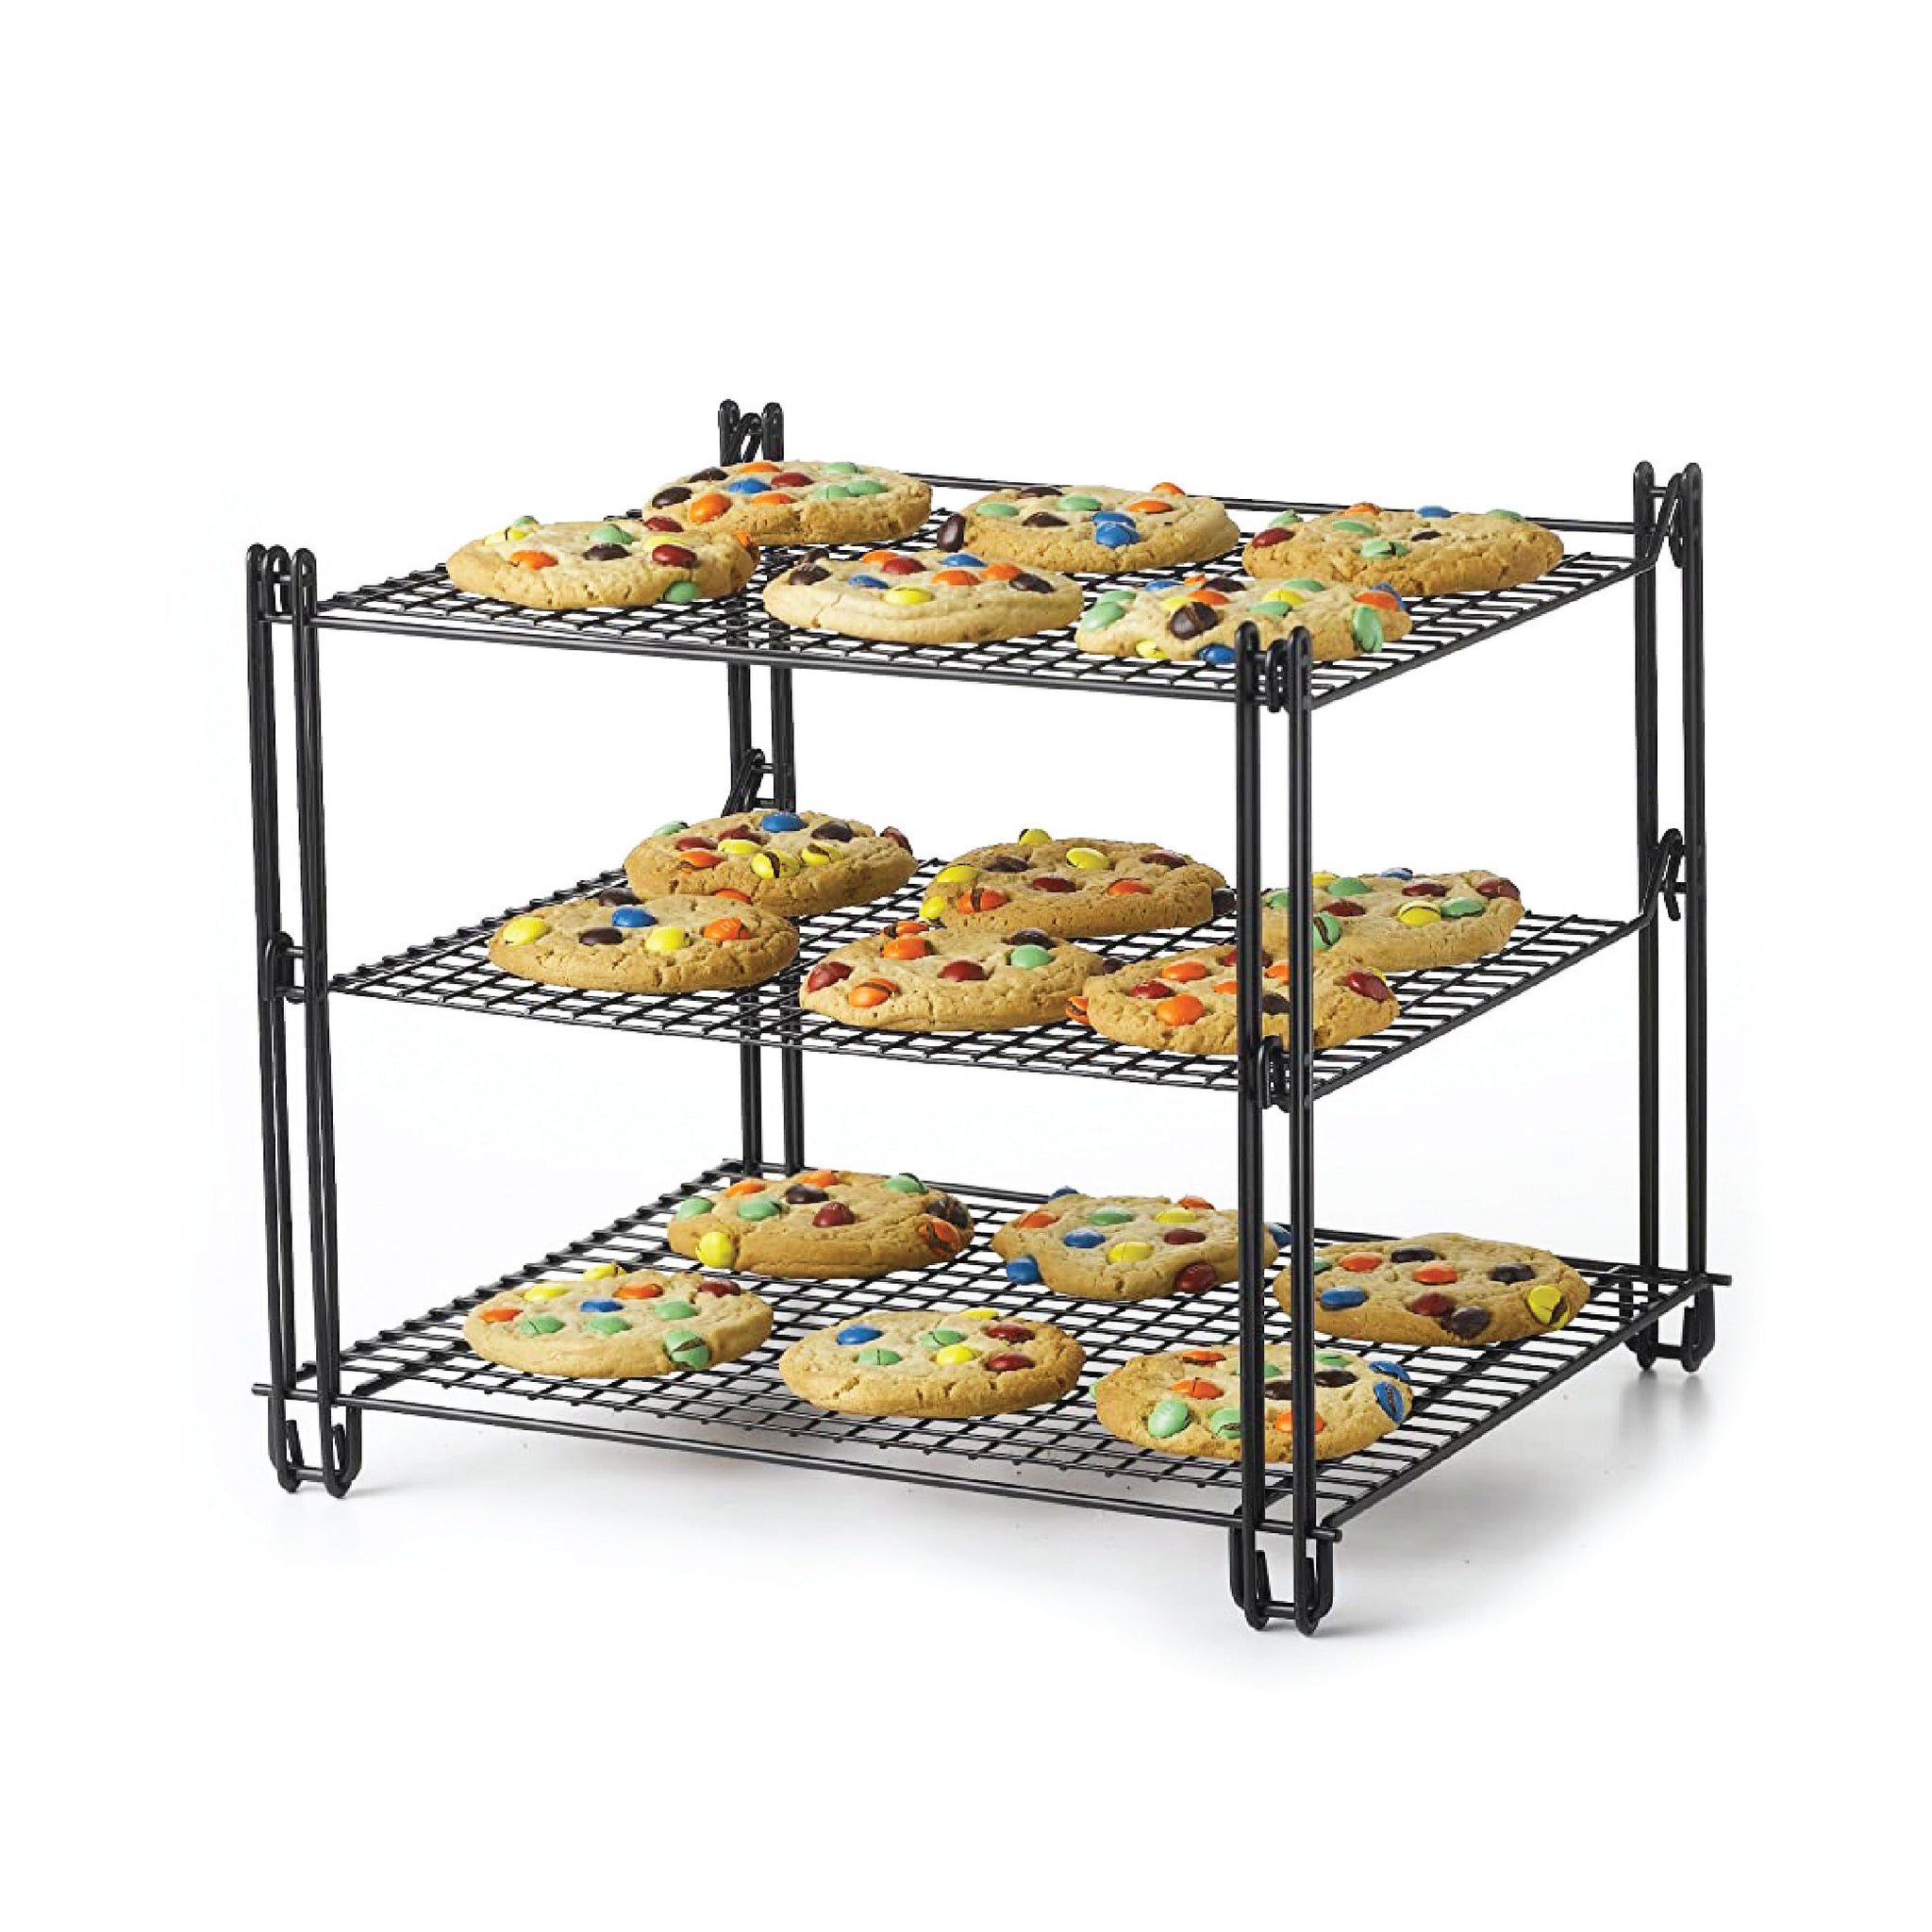 Nifty 3-in-1 Baking Rack – Nickel Chrome Plating, Cooling & Baking Rack,  Multipurpose Kitchen Accessory, Folds Flat for Easy Storage, Use for  Cookies